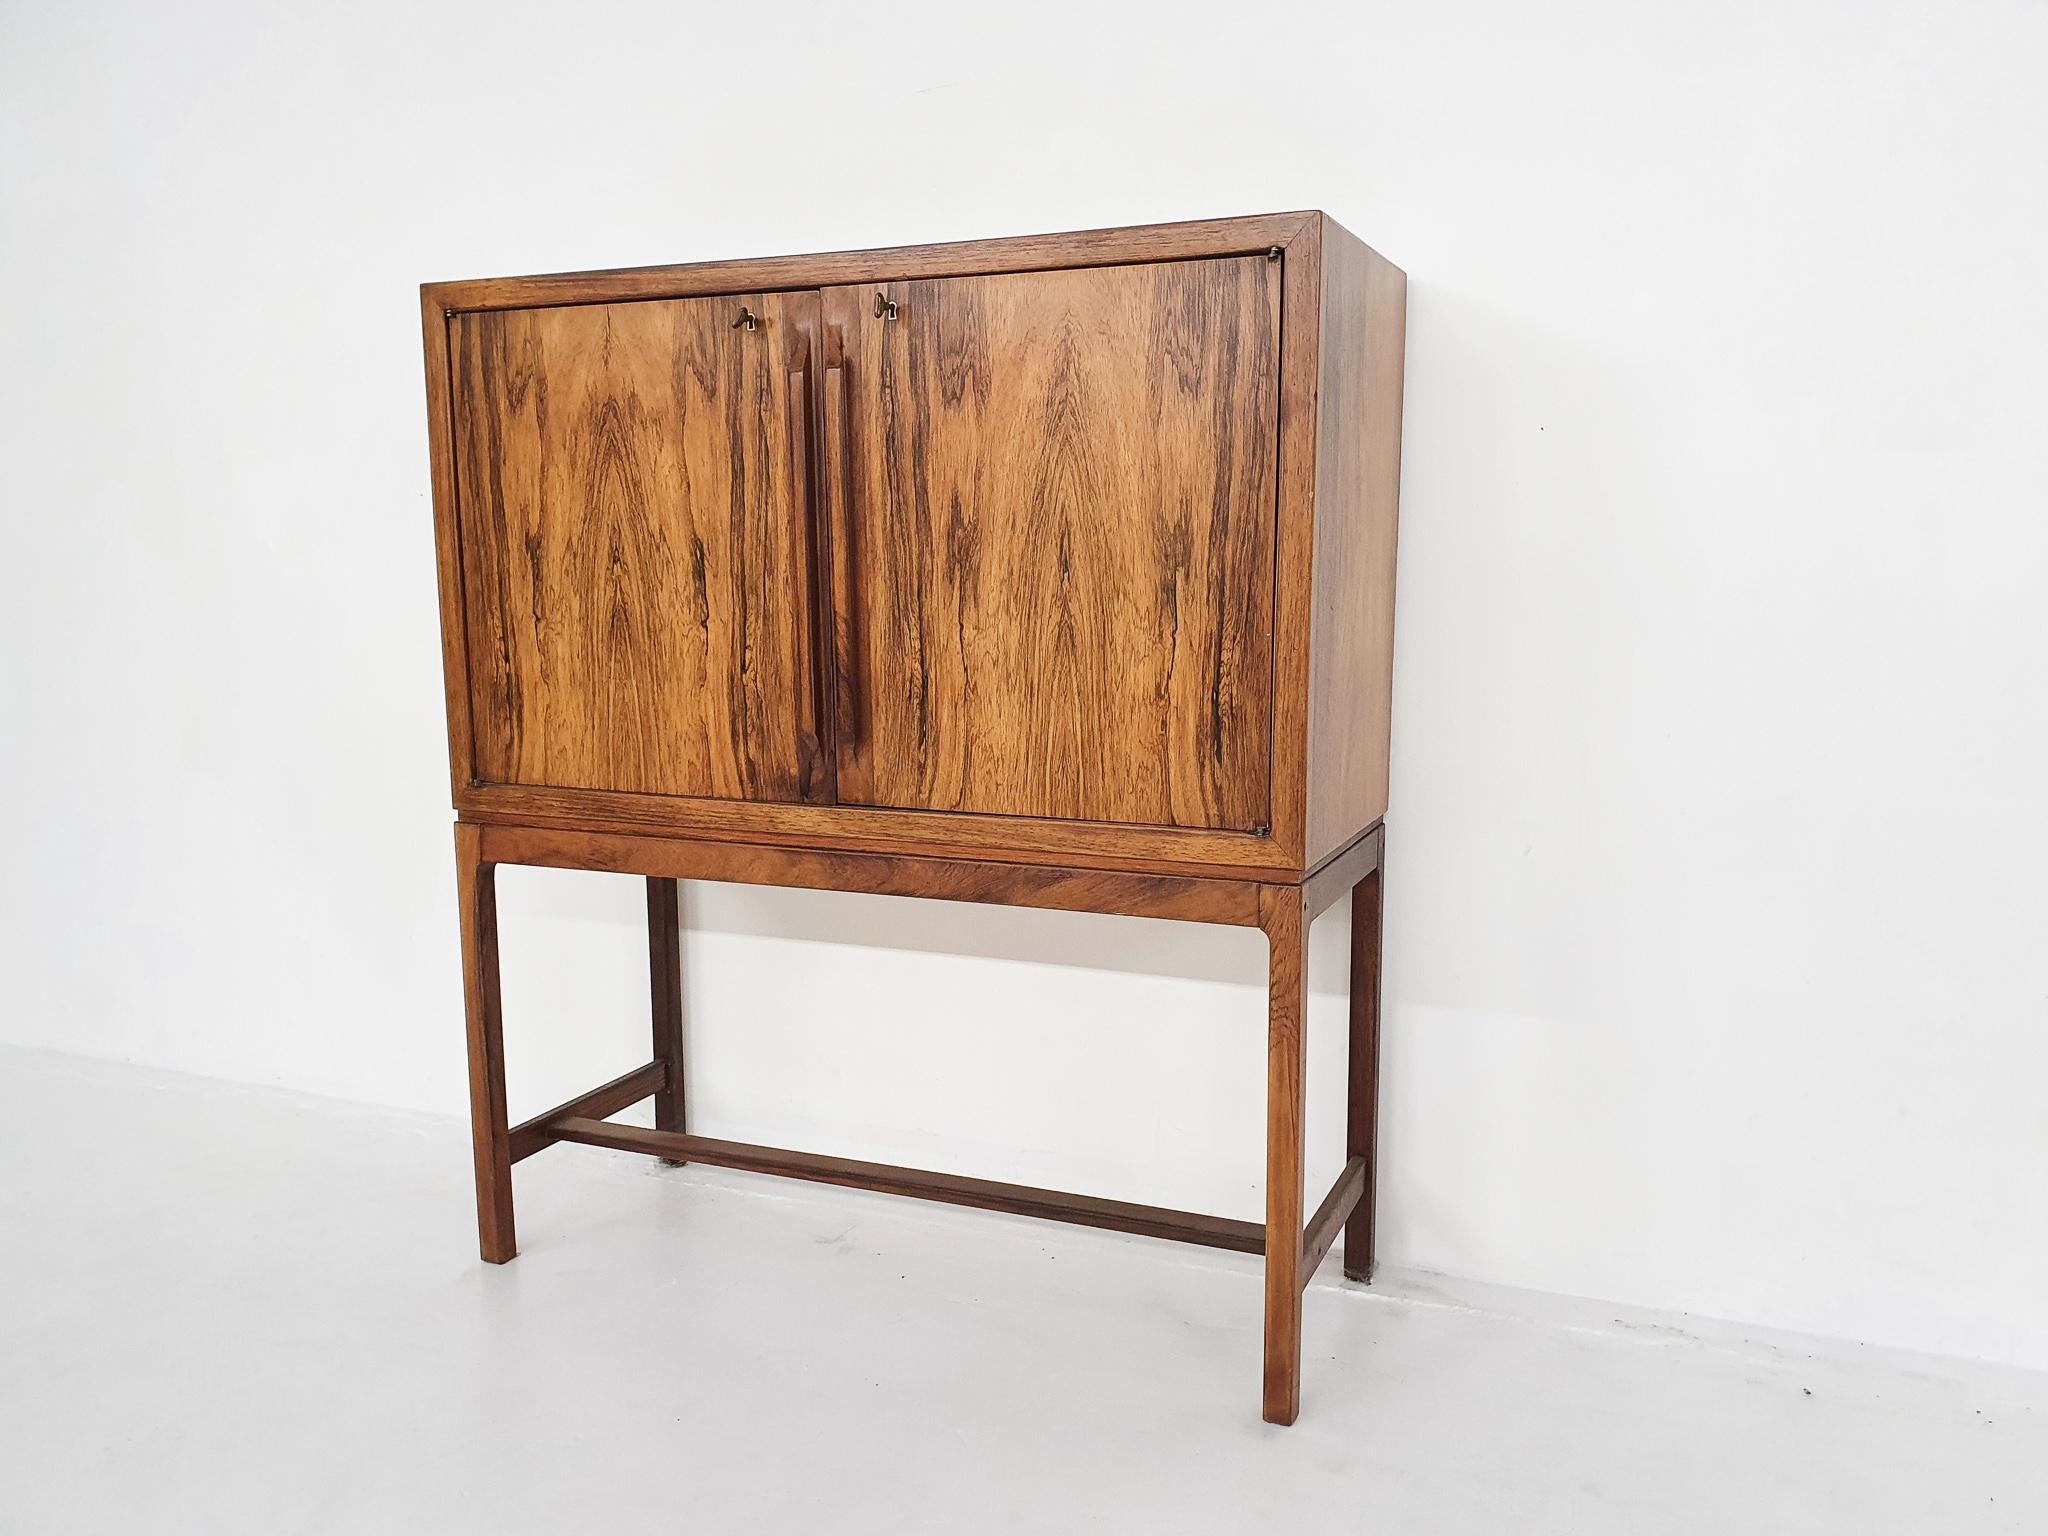 Super high quality and elegant bar cabinet or dry bar in rosewood by Torbjørn Afdal for Mellemstrands Møbelfabrik.

This item is true Scandinavian high end furniture. It is made of the most beautiful rosewood and has nice brass details. Inside the